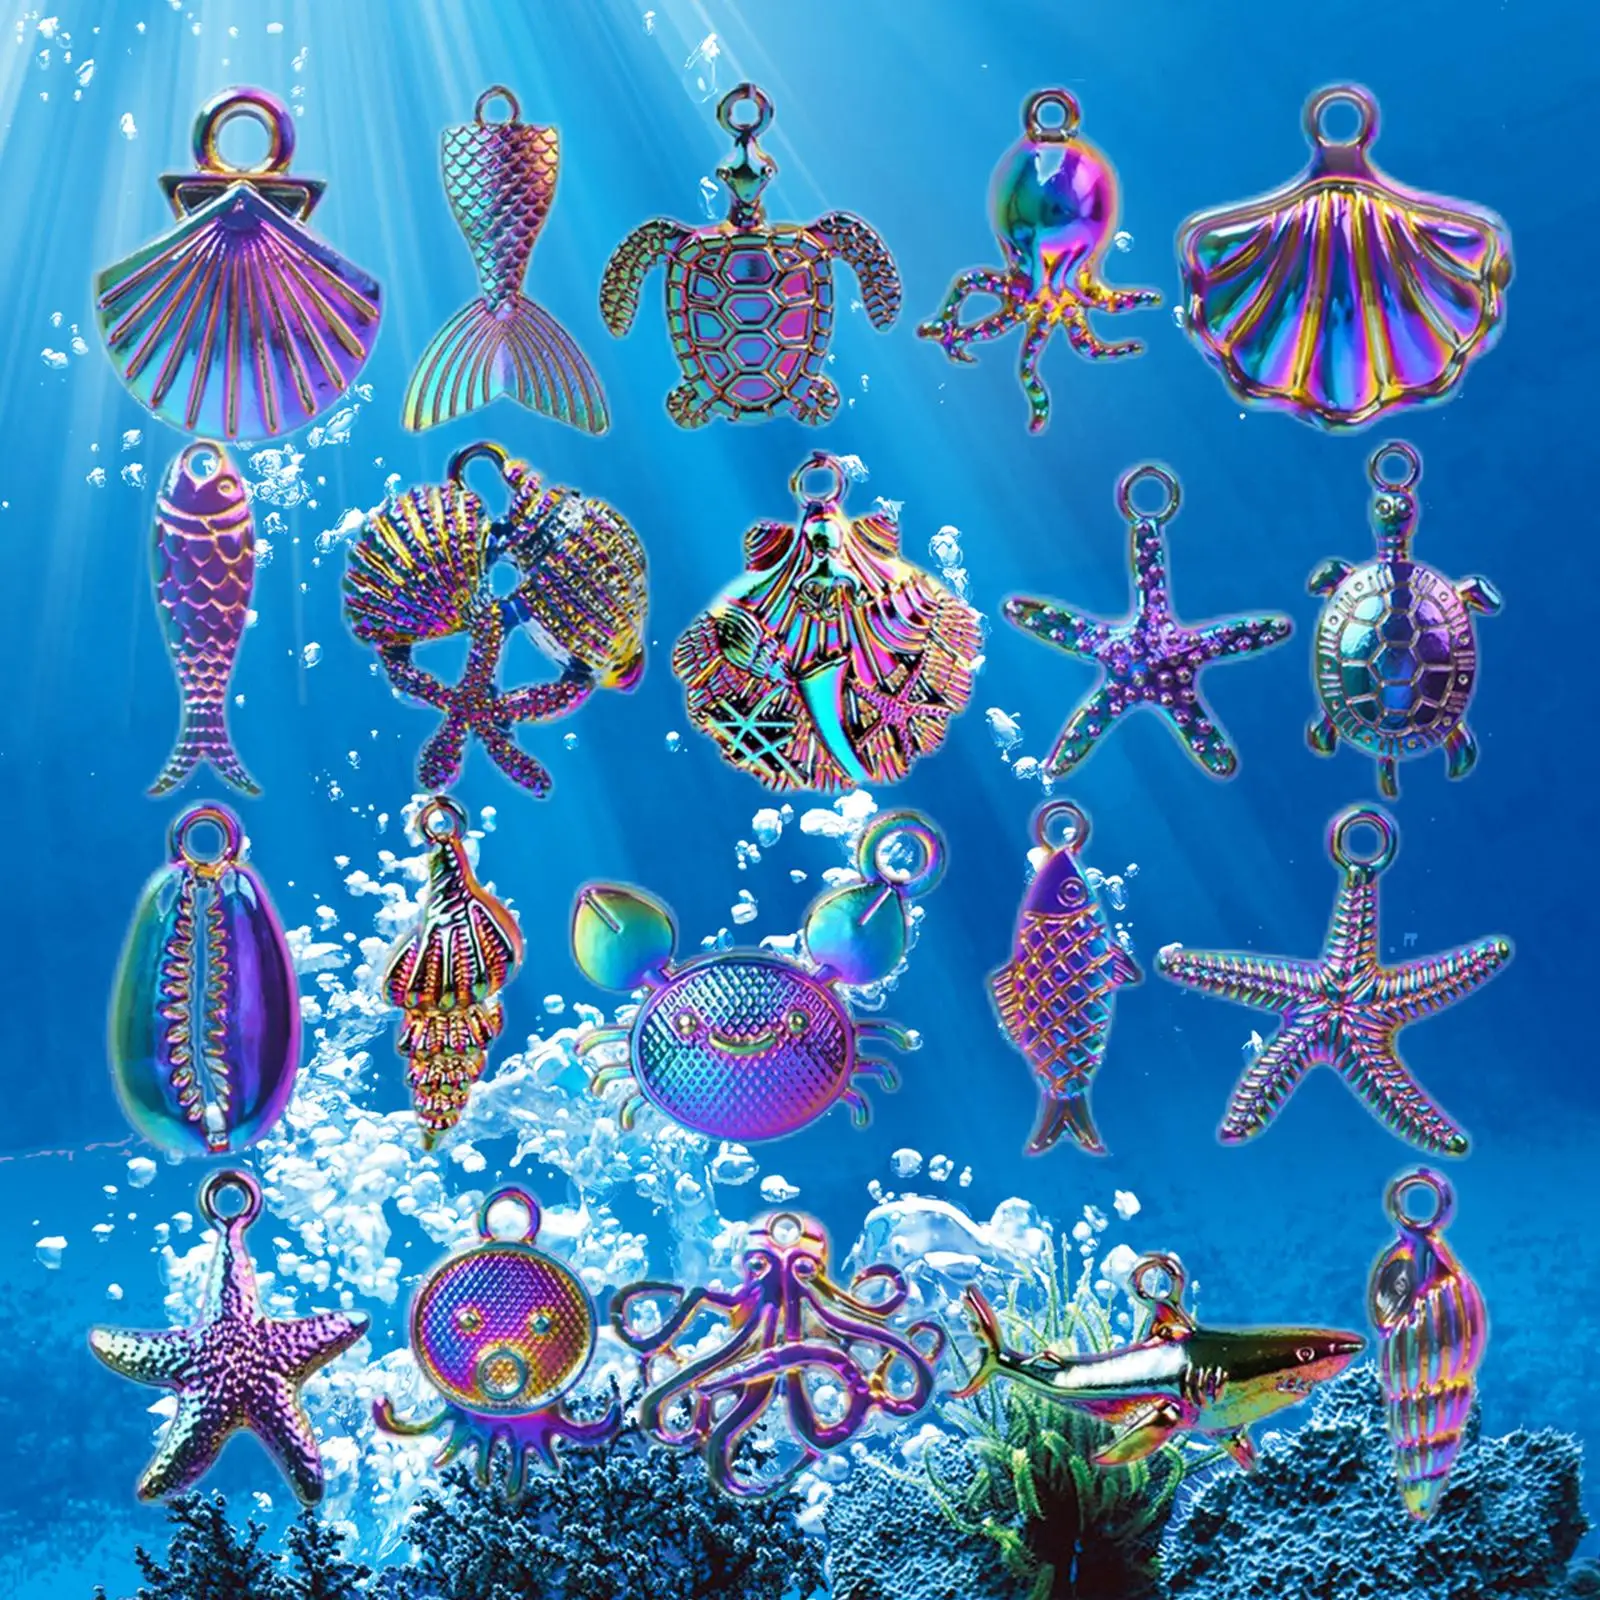 20x Ocean Theme Charms Pendants Starfish Shell Octopus Ocean Elements Charms DIY Pendants for DIY Jewelry Making Key Chains Gift